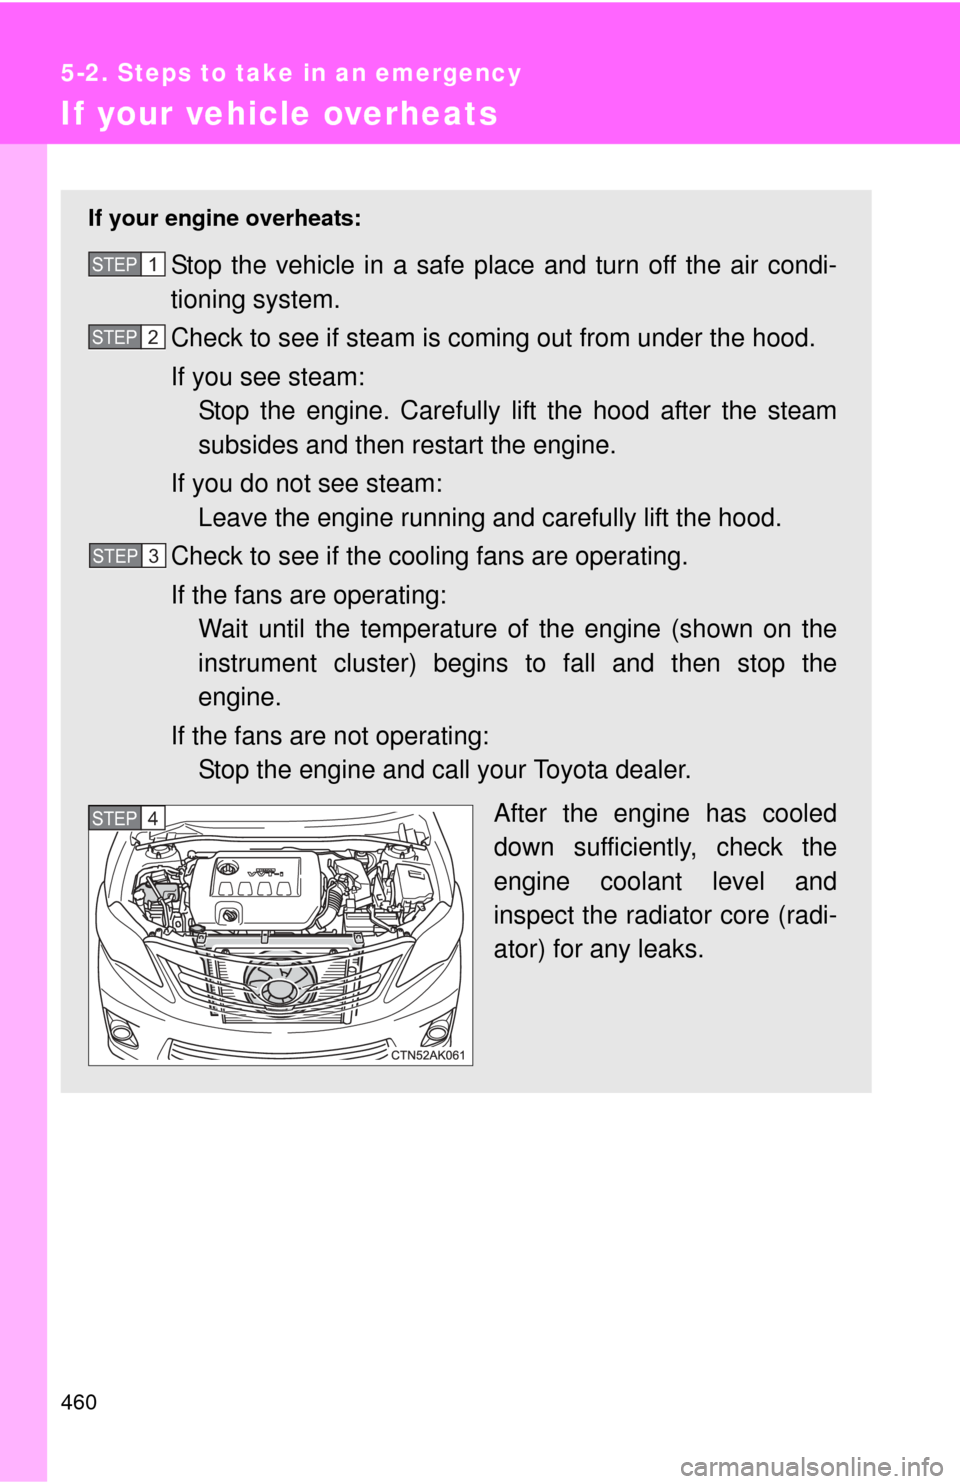 TOYOTA COROLLA 2011 10.G Owners Manual 460
5-2. Steps to take in an emergency
If your vehicle overheats
If your engine overheats:
Stop the vehicle in a safe place and turn off the air condi-
tioning system.
Check to see if steam is coming 